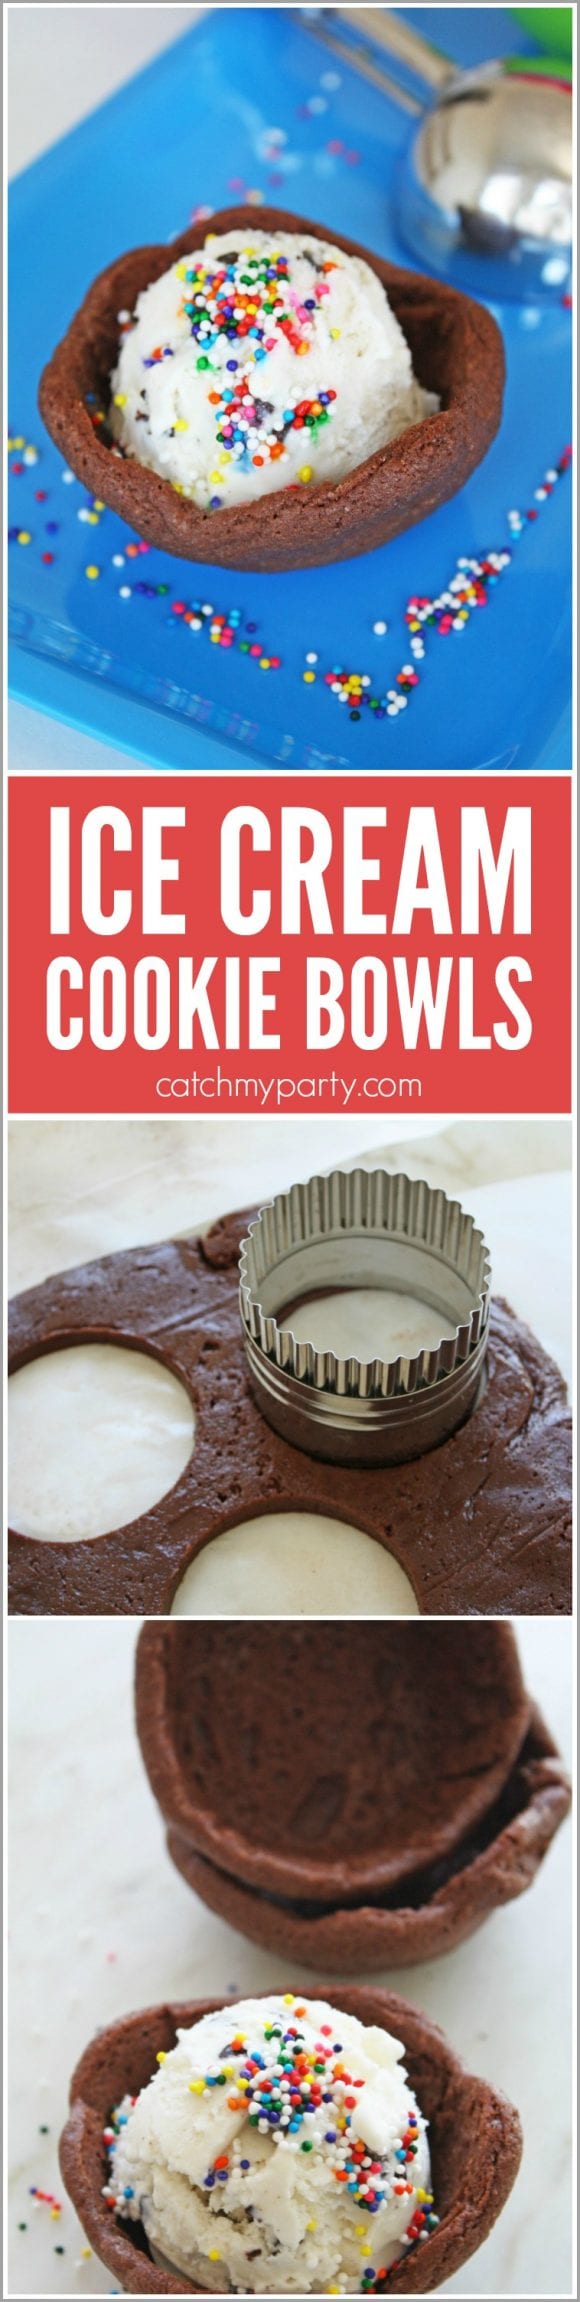 Ice Cream Cookie Bowls | CatchMyParty.com